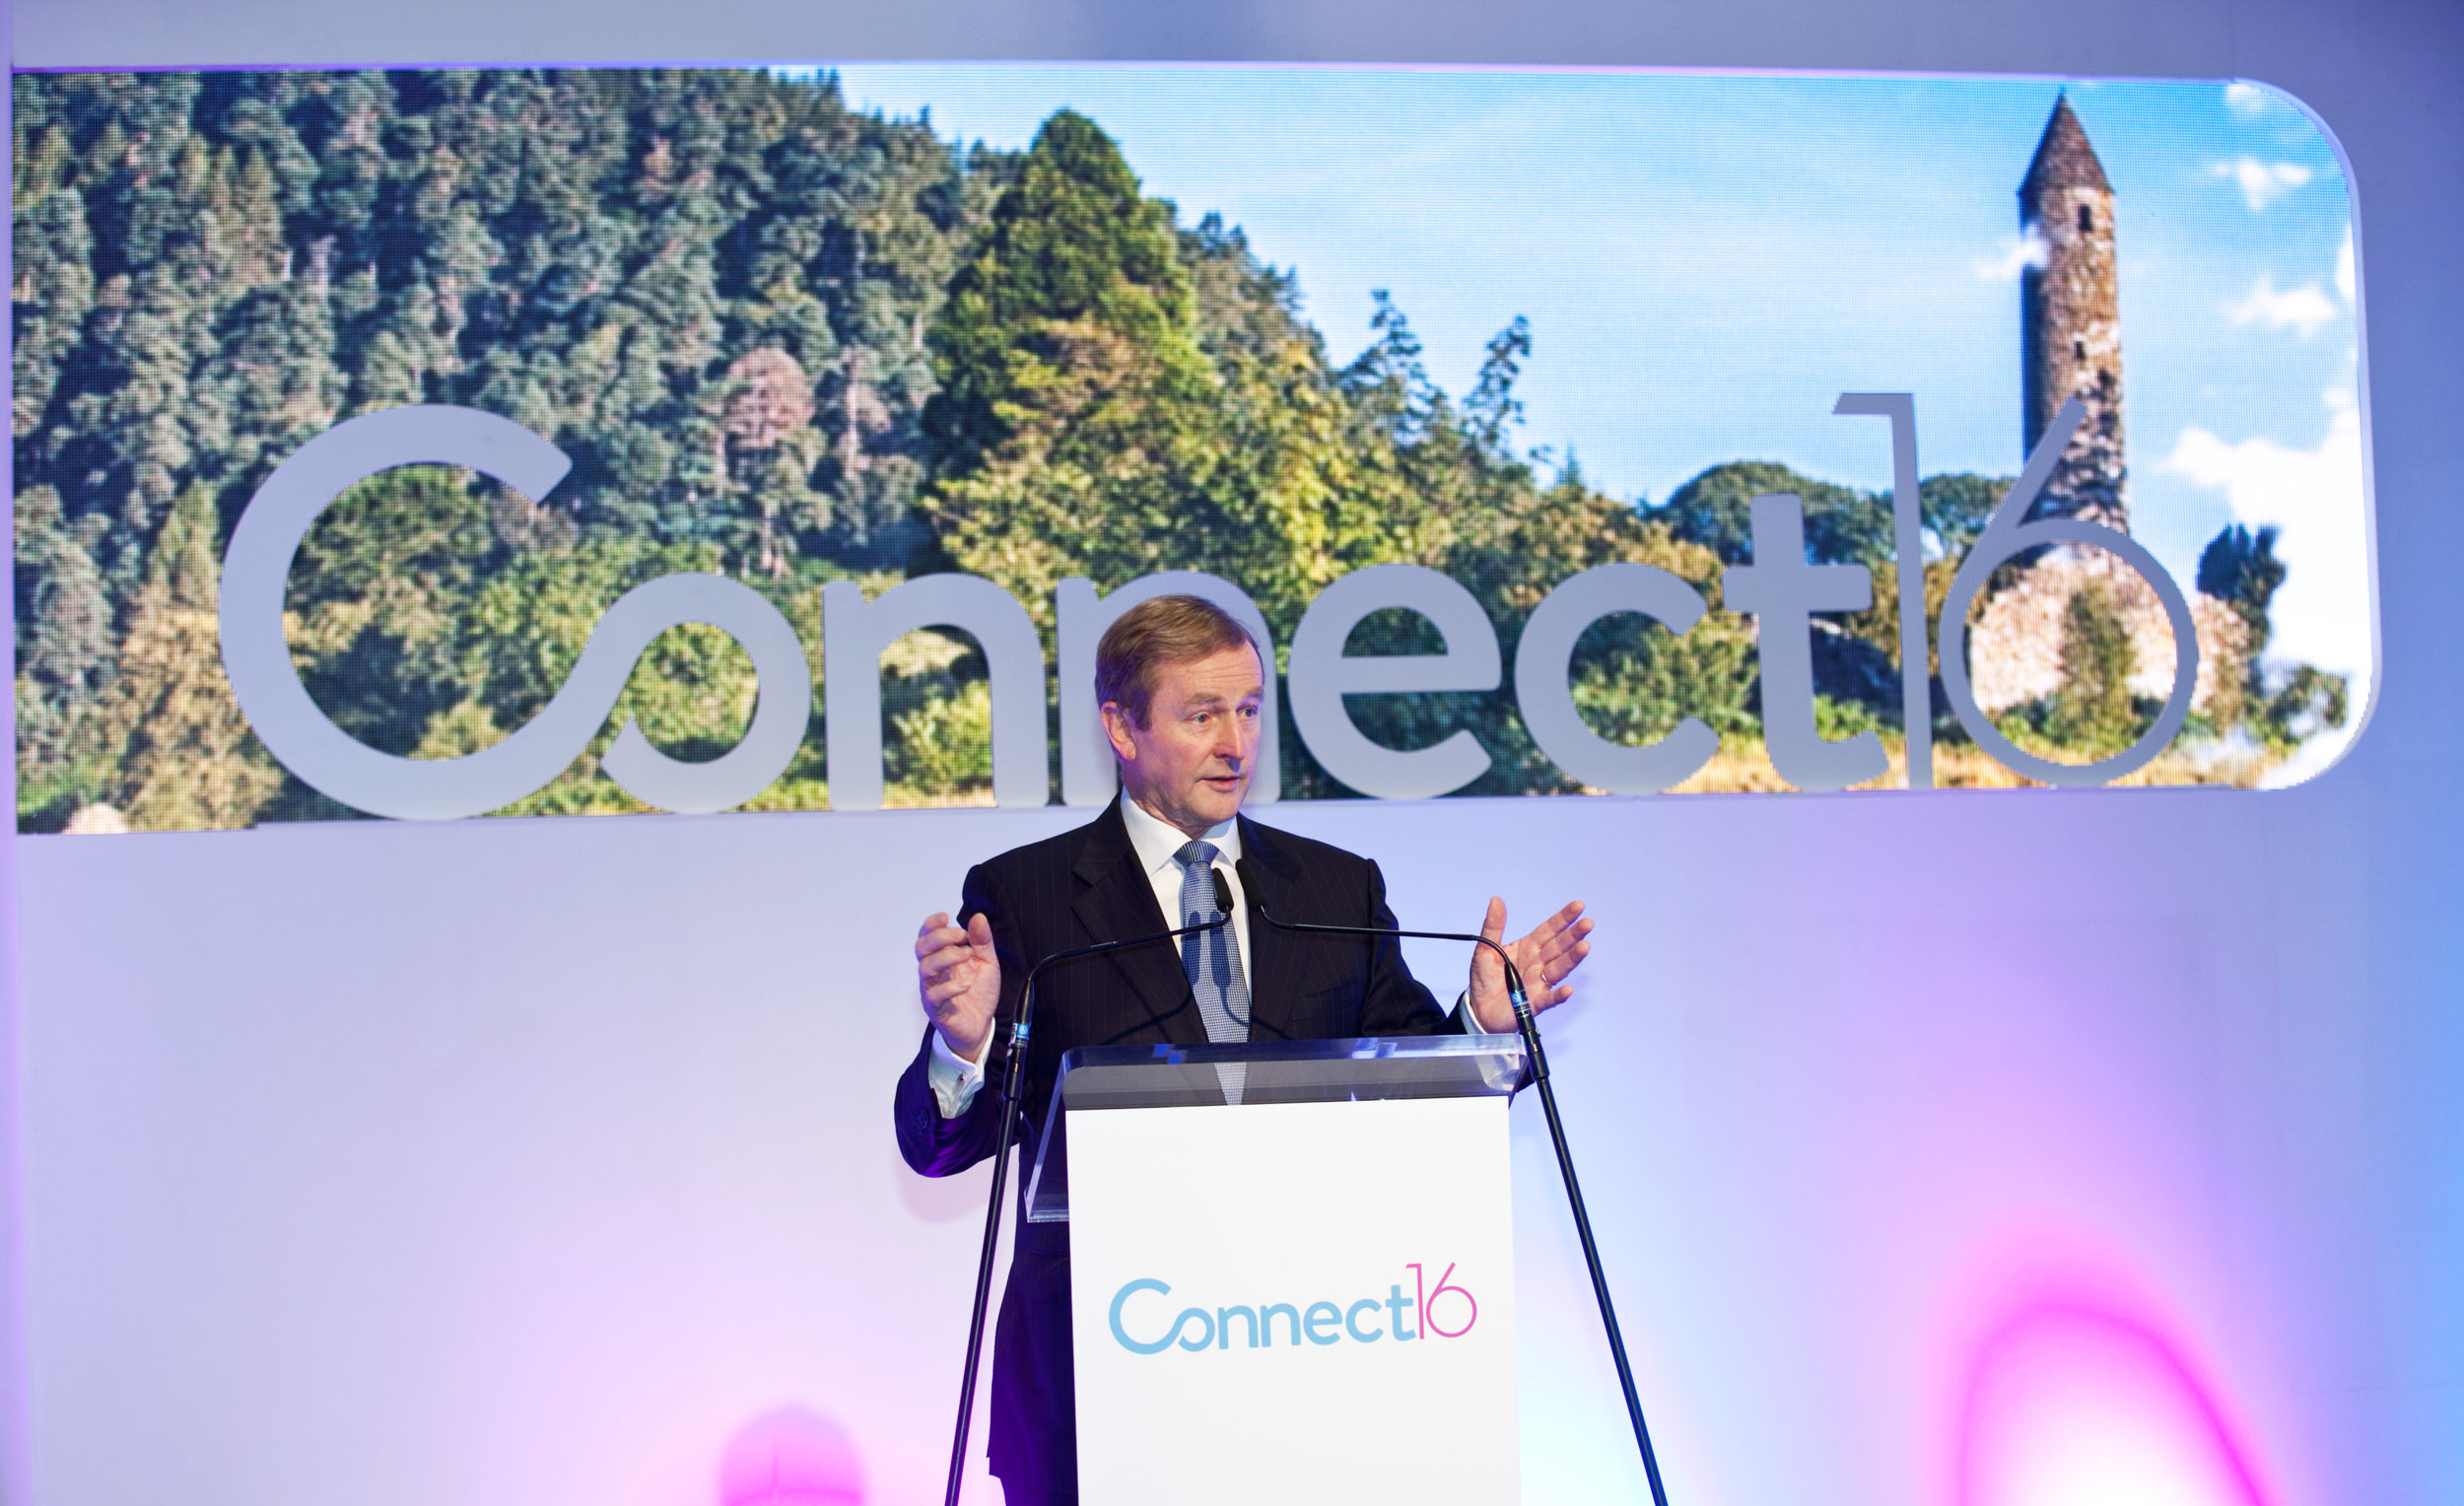   An Taoiseach Enda Kenny TD opening the CONNECT16 conference  